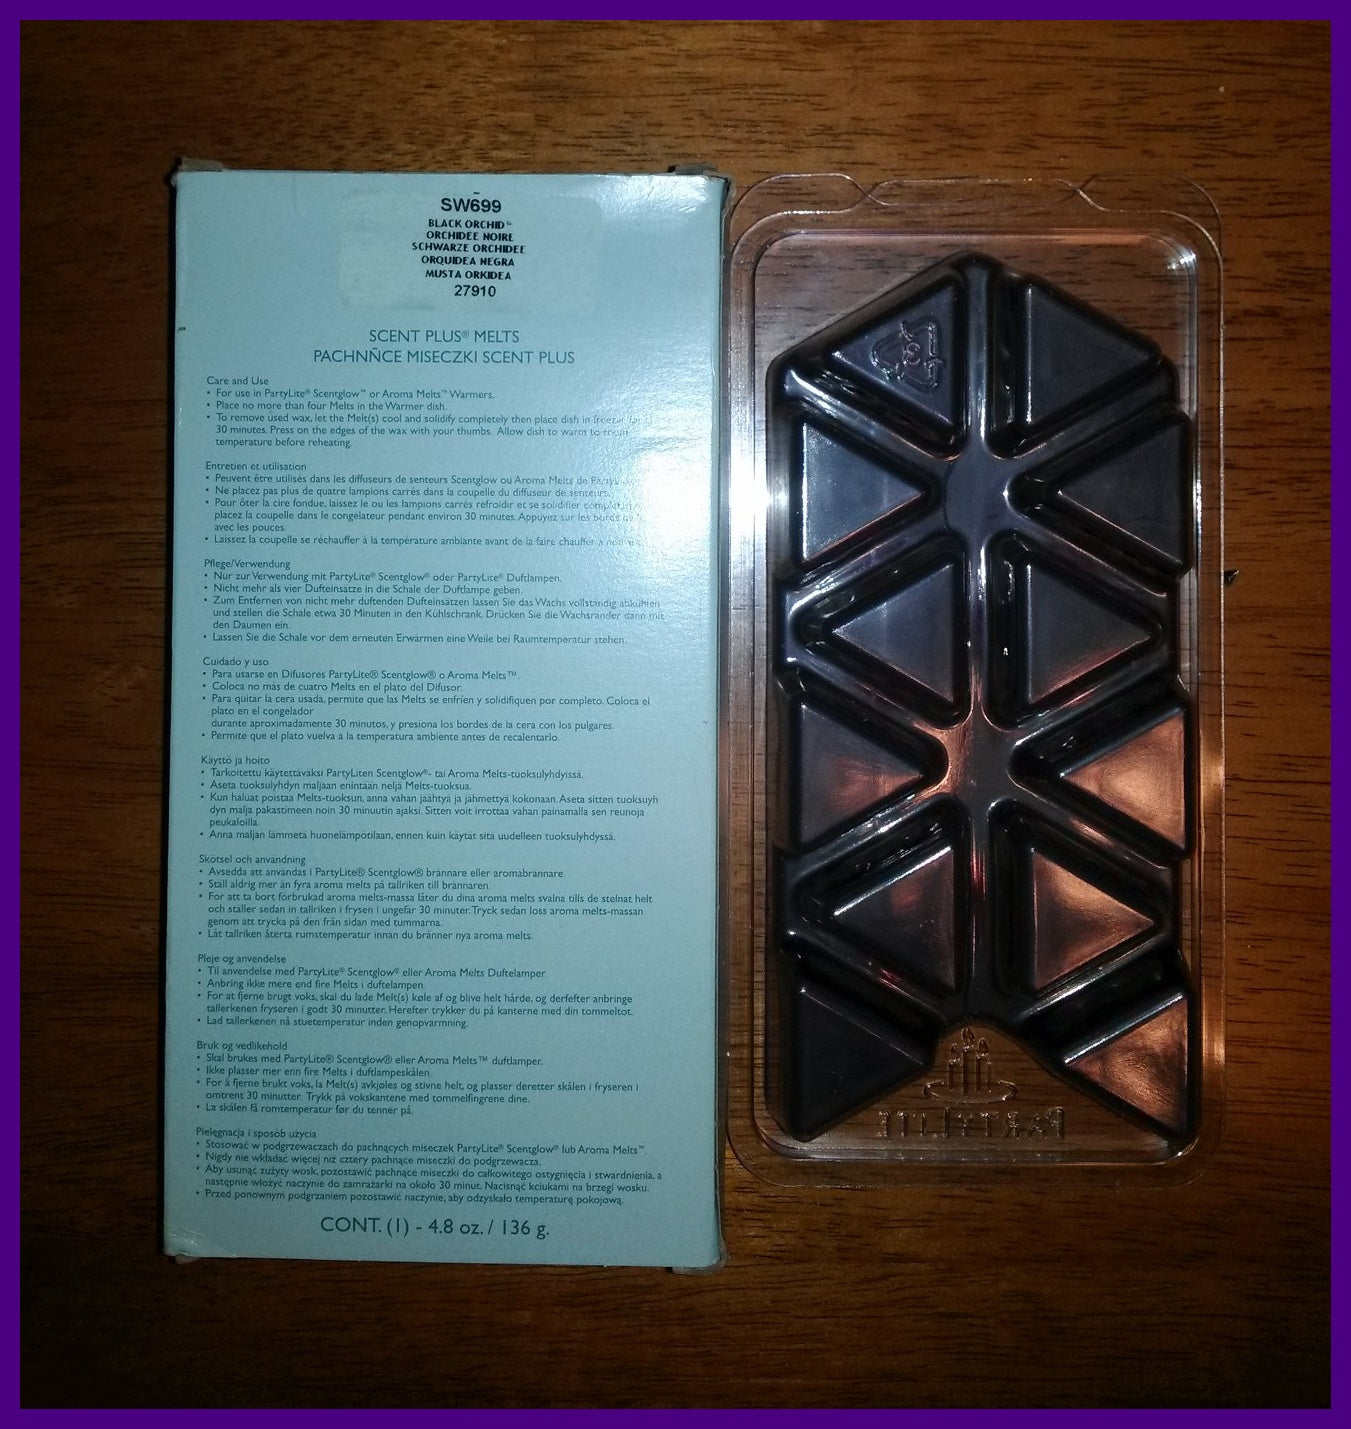 PartyLite 12-pc SCENT PLUS AROMA MELTS Rectangle Brick Scented Simmering Wax BLACK ORCHID